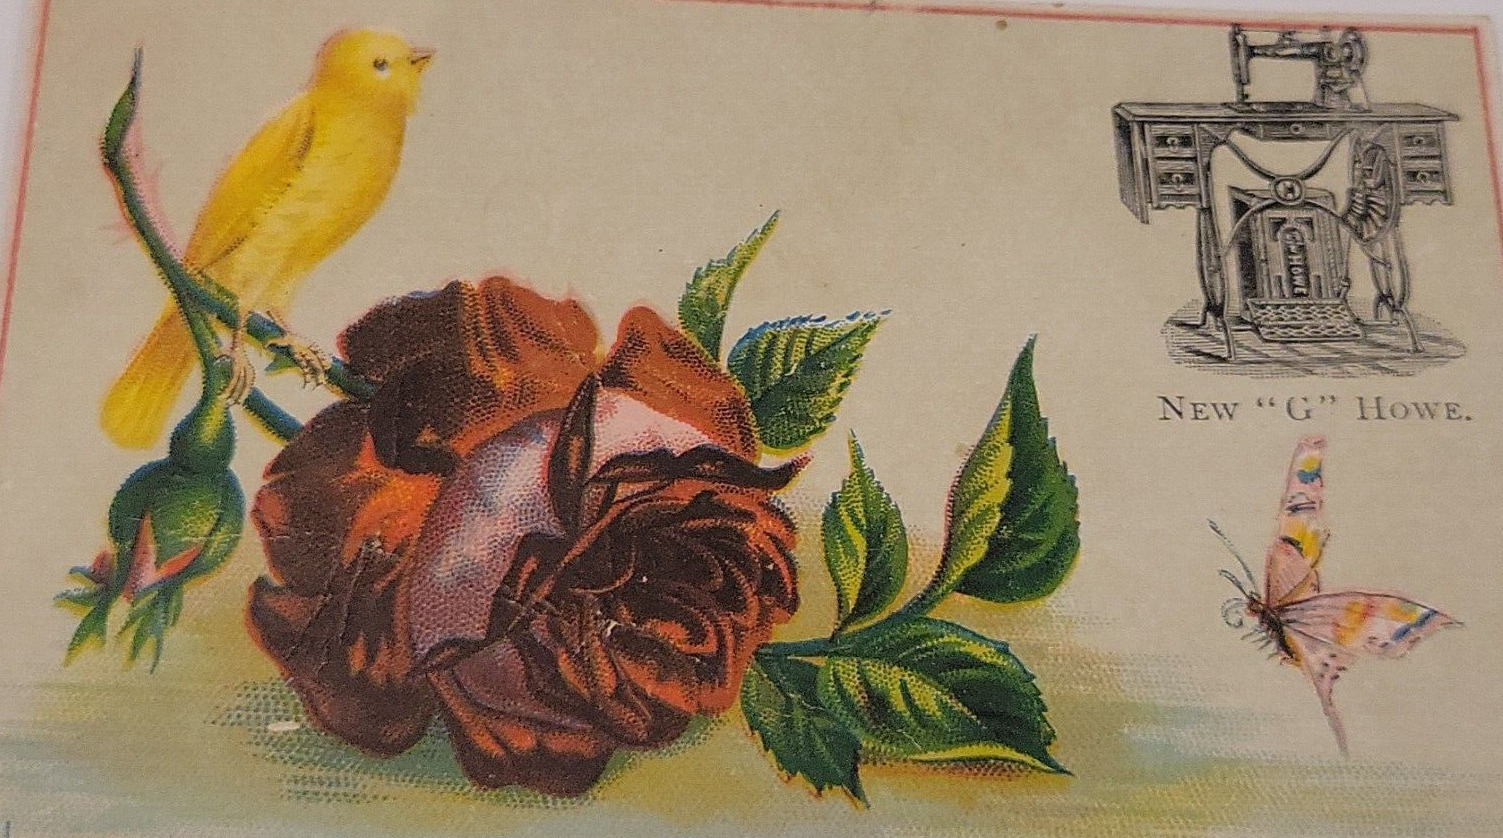 New Howe Sewing Machine G Butterfly Canary Rose 501 Victorian Trade Card 